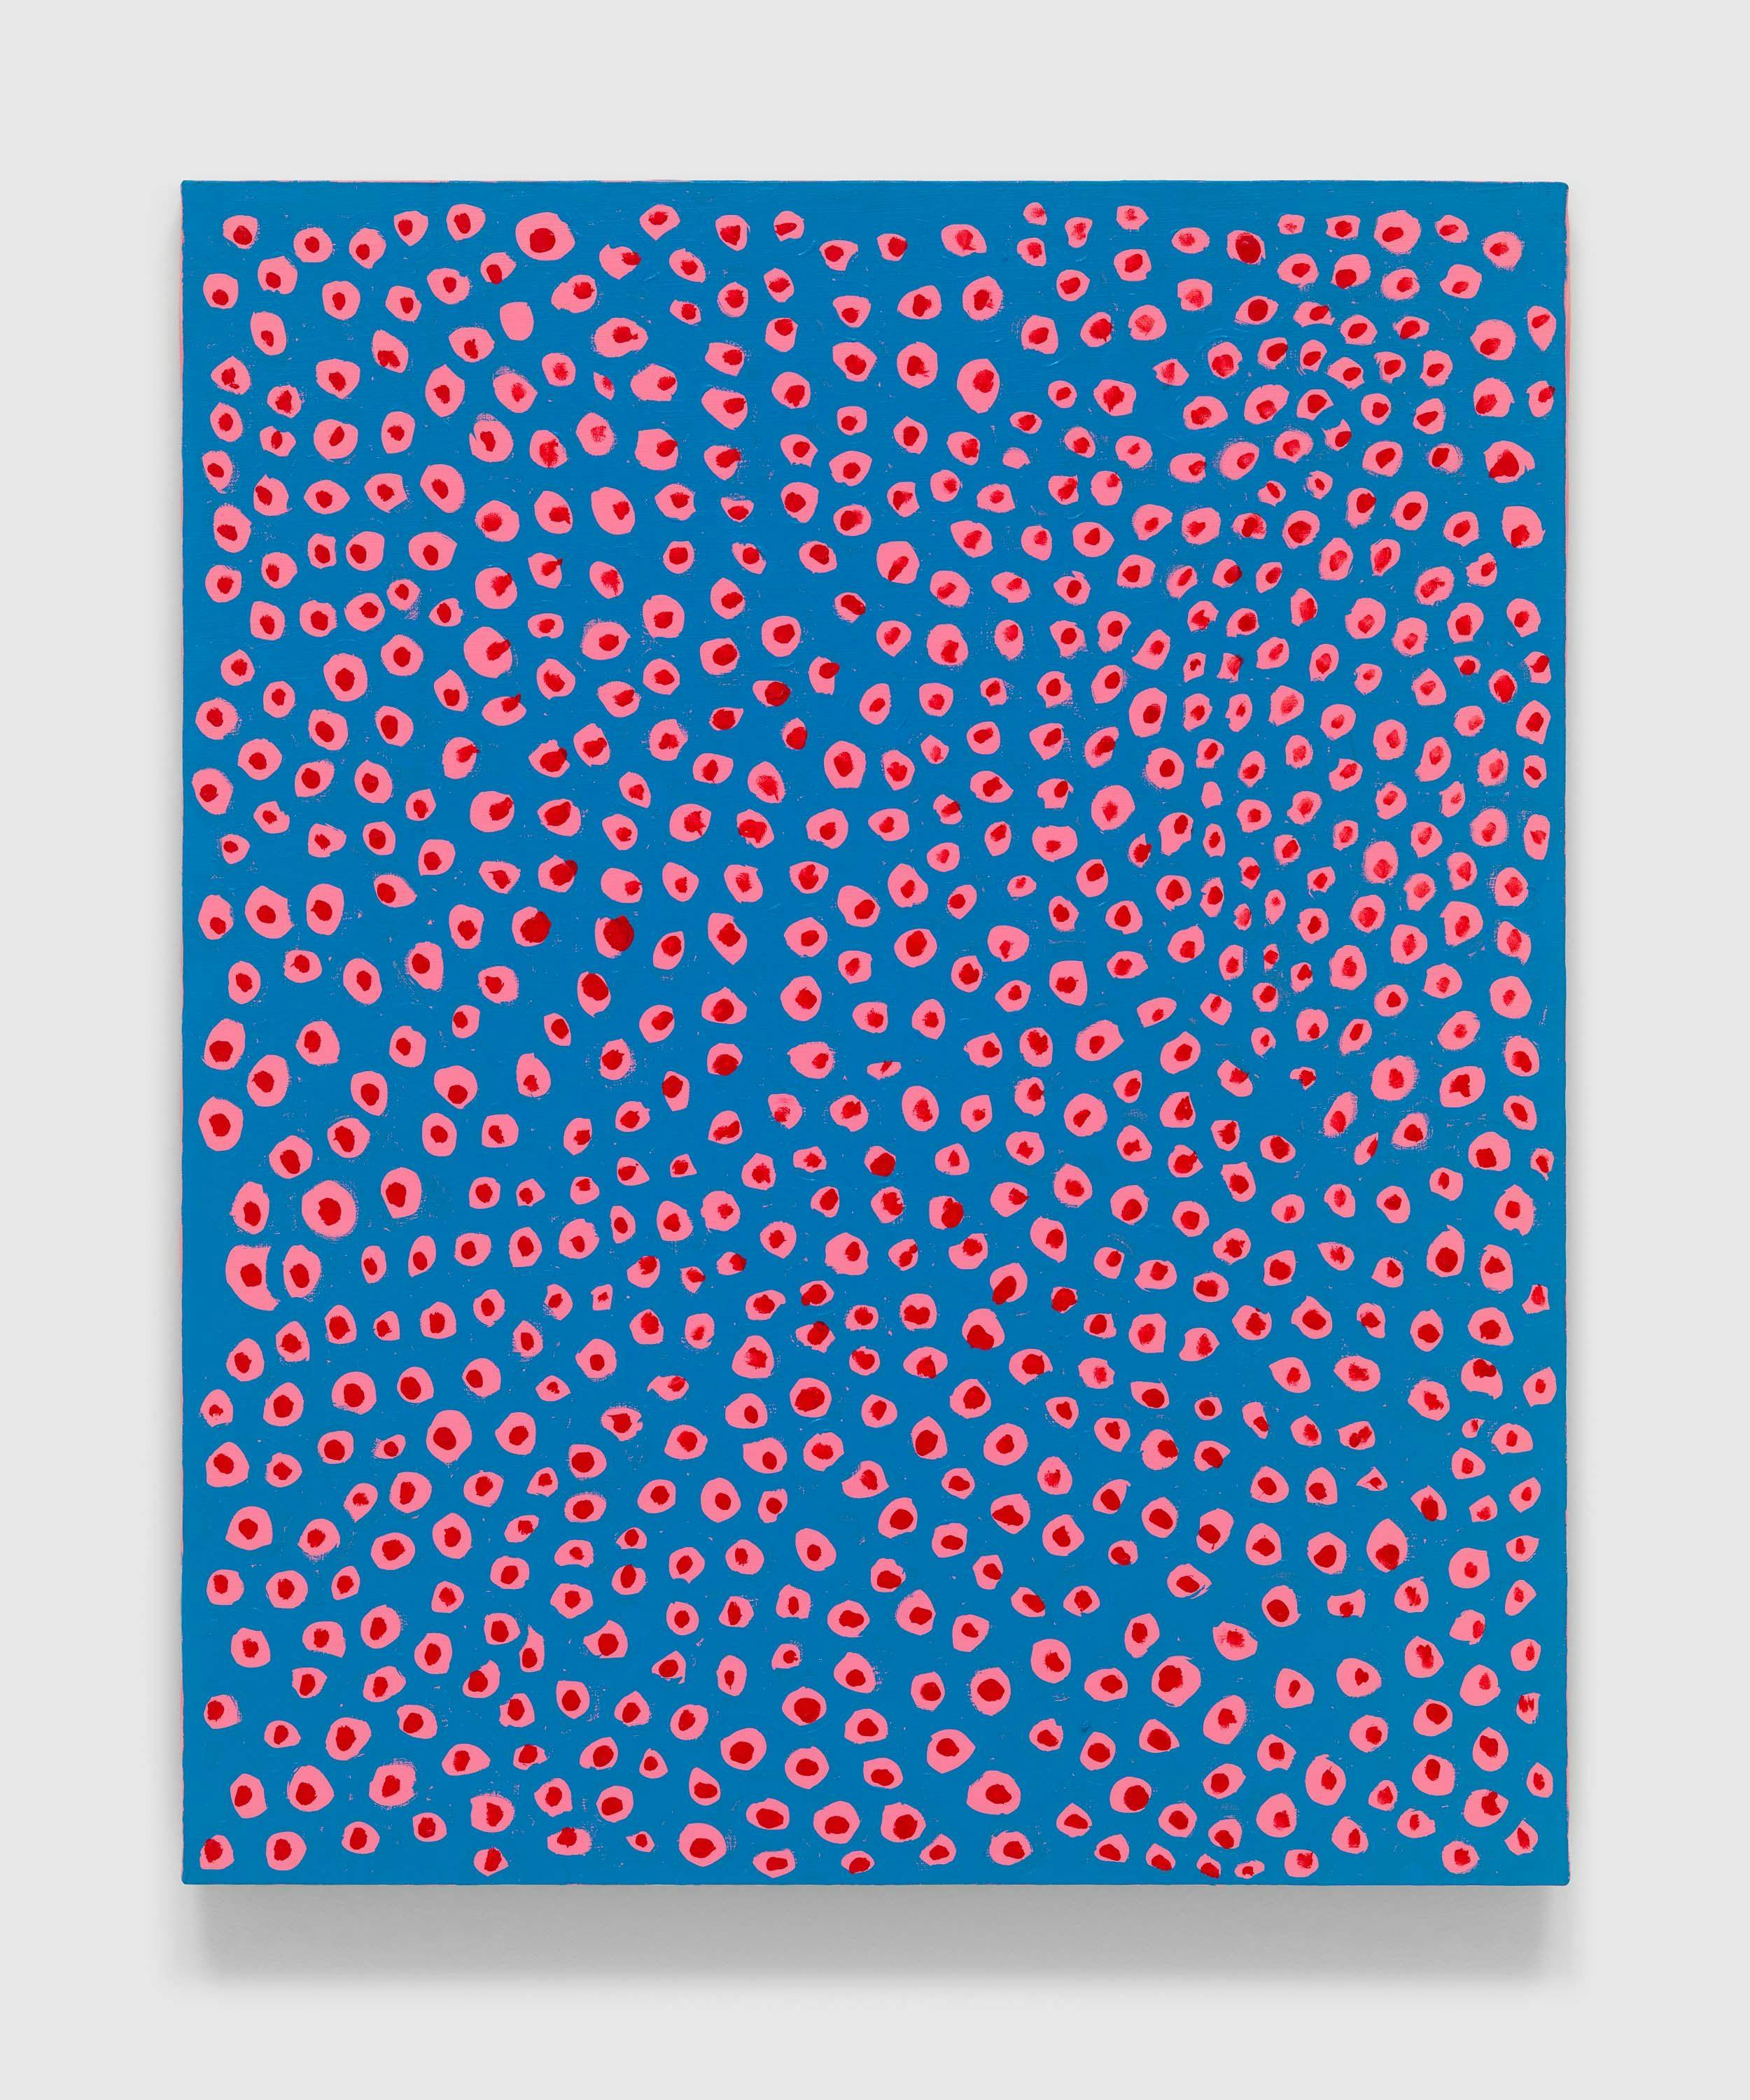 A painting by Yayoi Kusama, titled EVERY DAY I PRAY FOR LOVE, dated 2022.